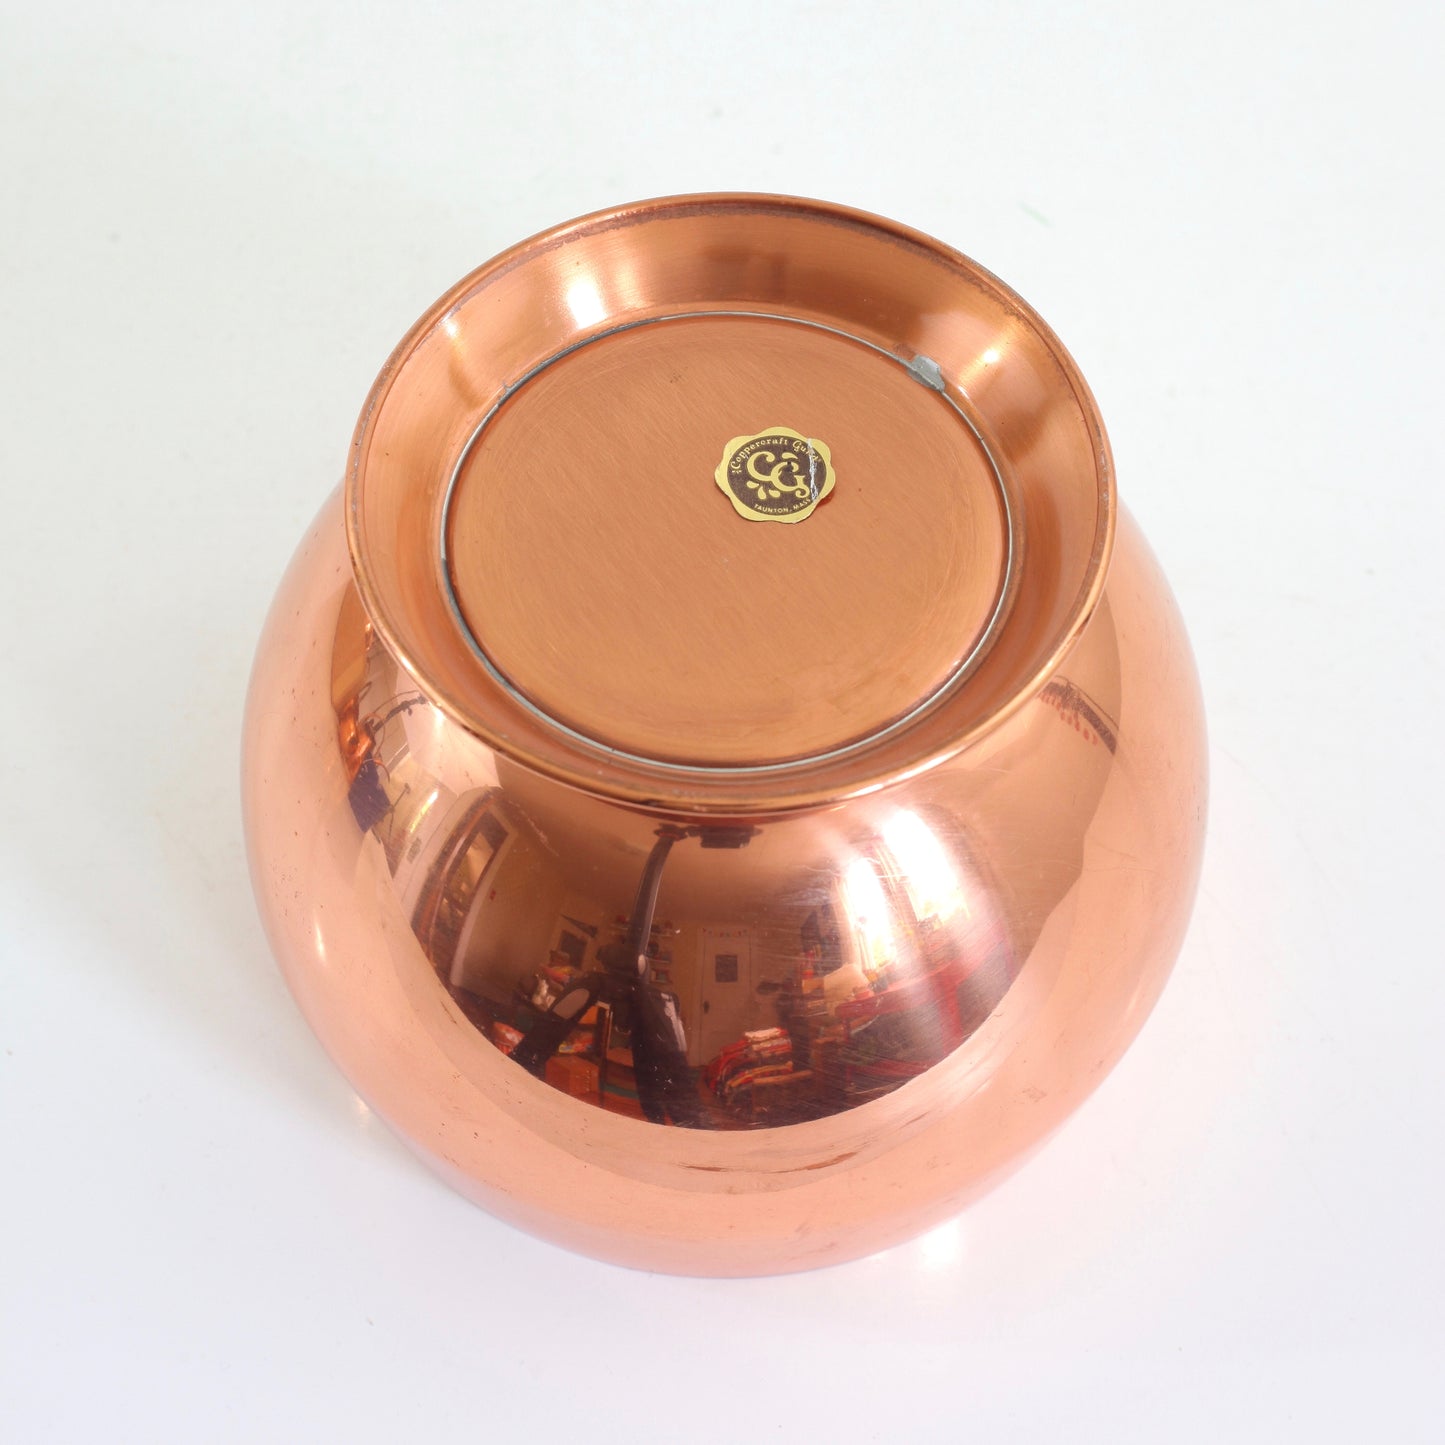 SOLD - Mid Century Copper Planter by Coppercraft Guild